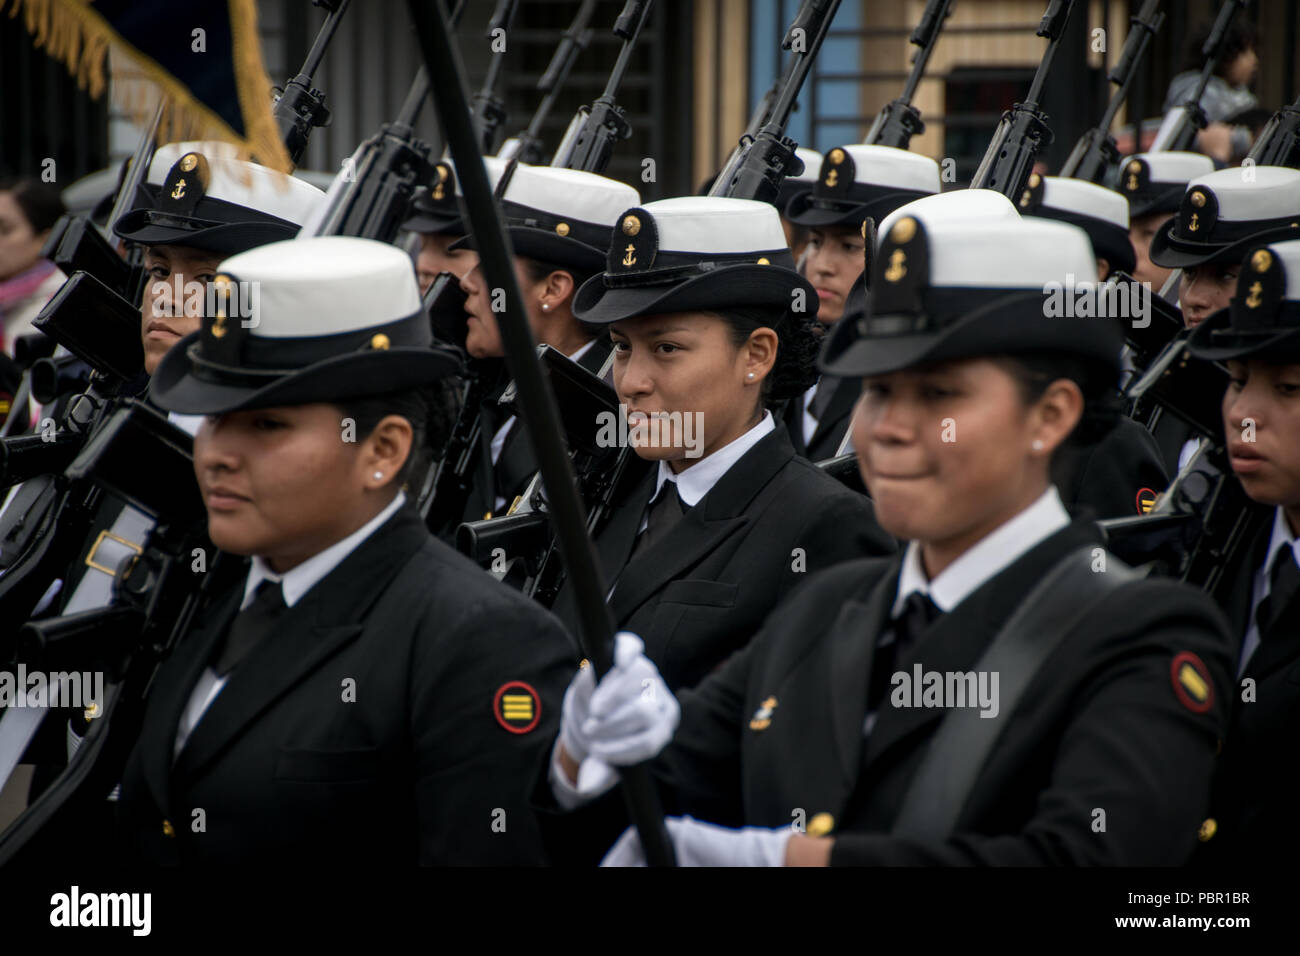 Lima, Lima Region, Peru. 29th July, 2018. Peruvian military personnel seen marching.Members of Peru's armed forces, coastguard, search & rescue, and police march in full uniform during the country's Gran Parada Militar. This parade always occurs the day after Peru's Independence Day marking the official end of festivities across the nation. Credit: Jason Sheil/SOPA Images/ZUMA Wire/Alamy Live News Stock Photo